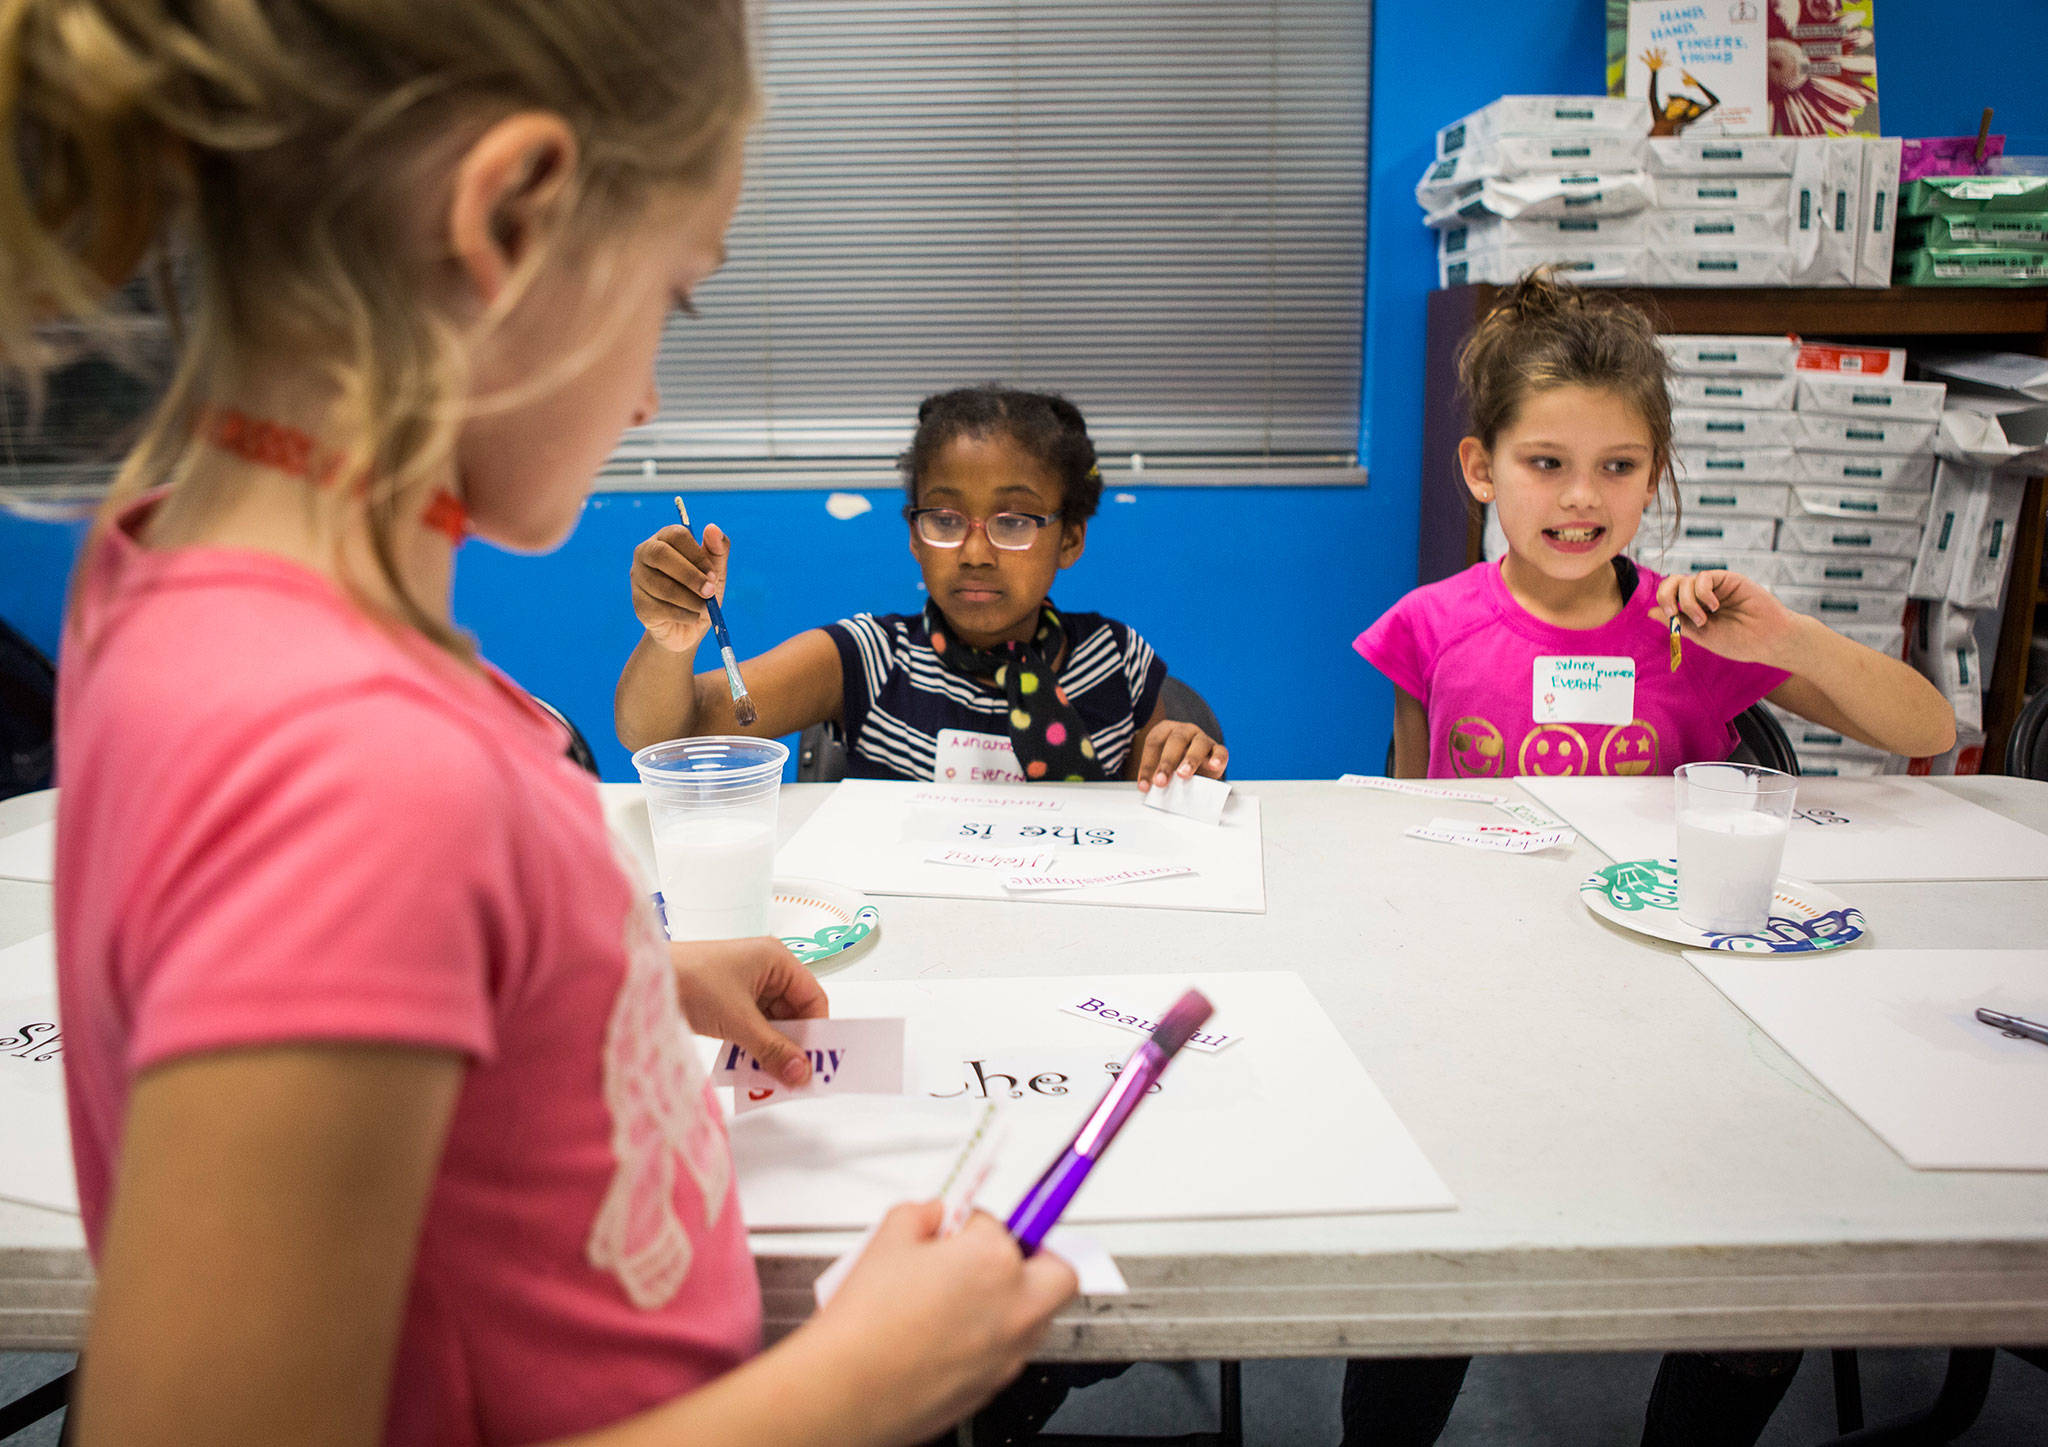 Adriana Smith (center) and Sydney Piekarski (right), both 8, work during an InspireHER event at the Snohomish Boys & Girls Club. (Olivia Vanni / The Herald)